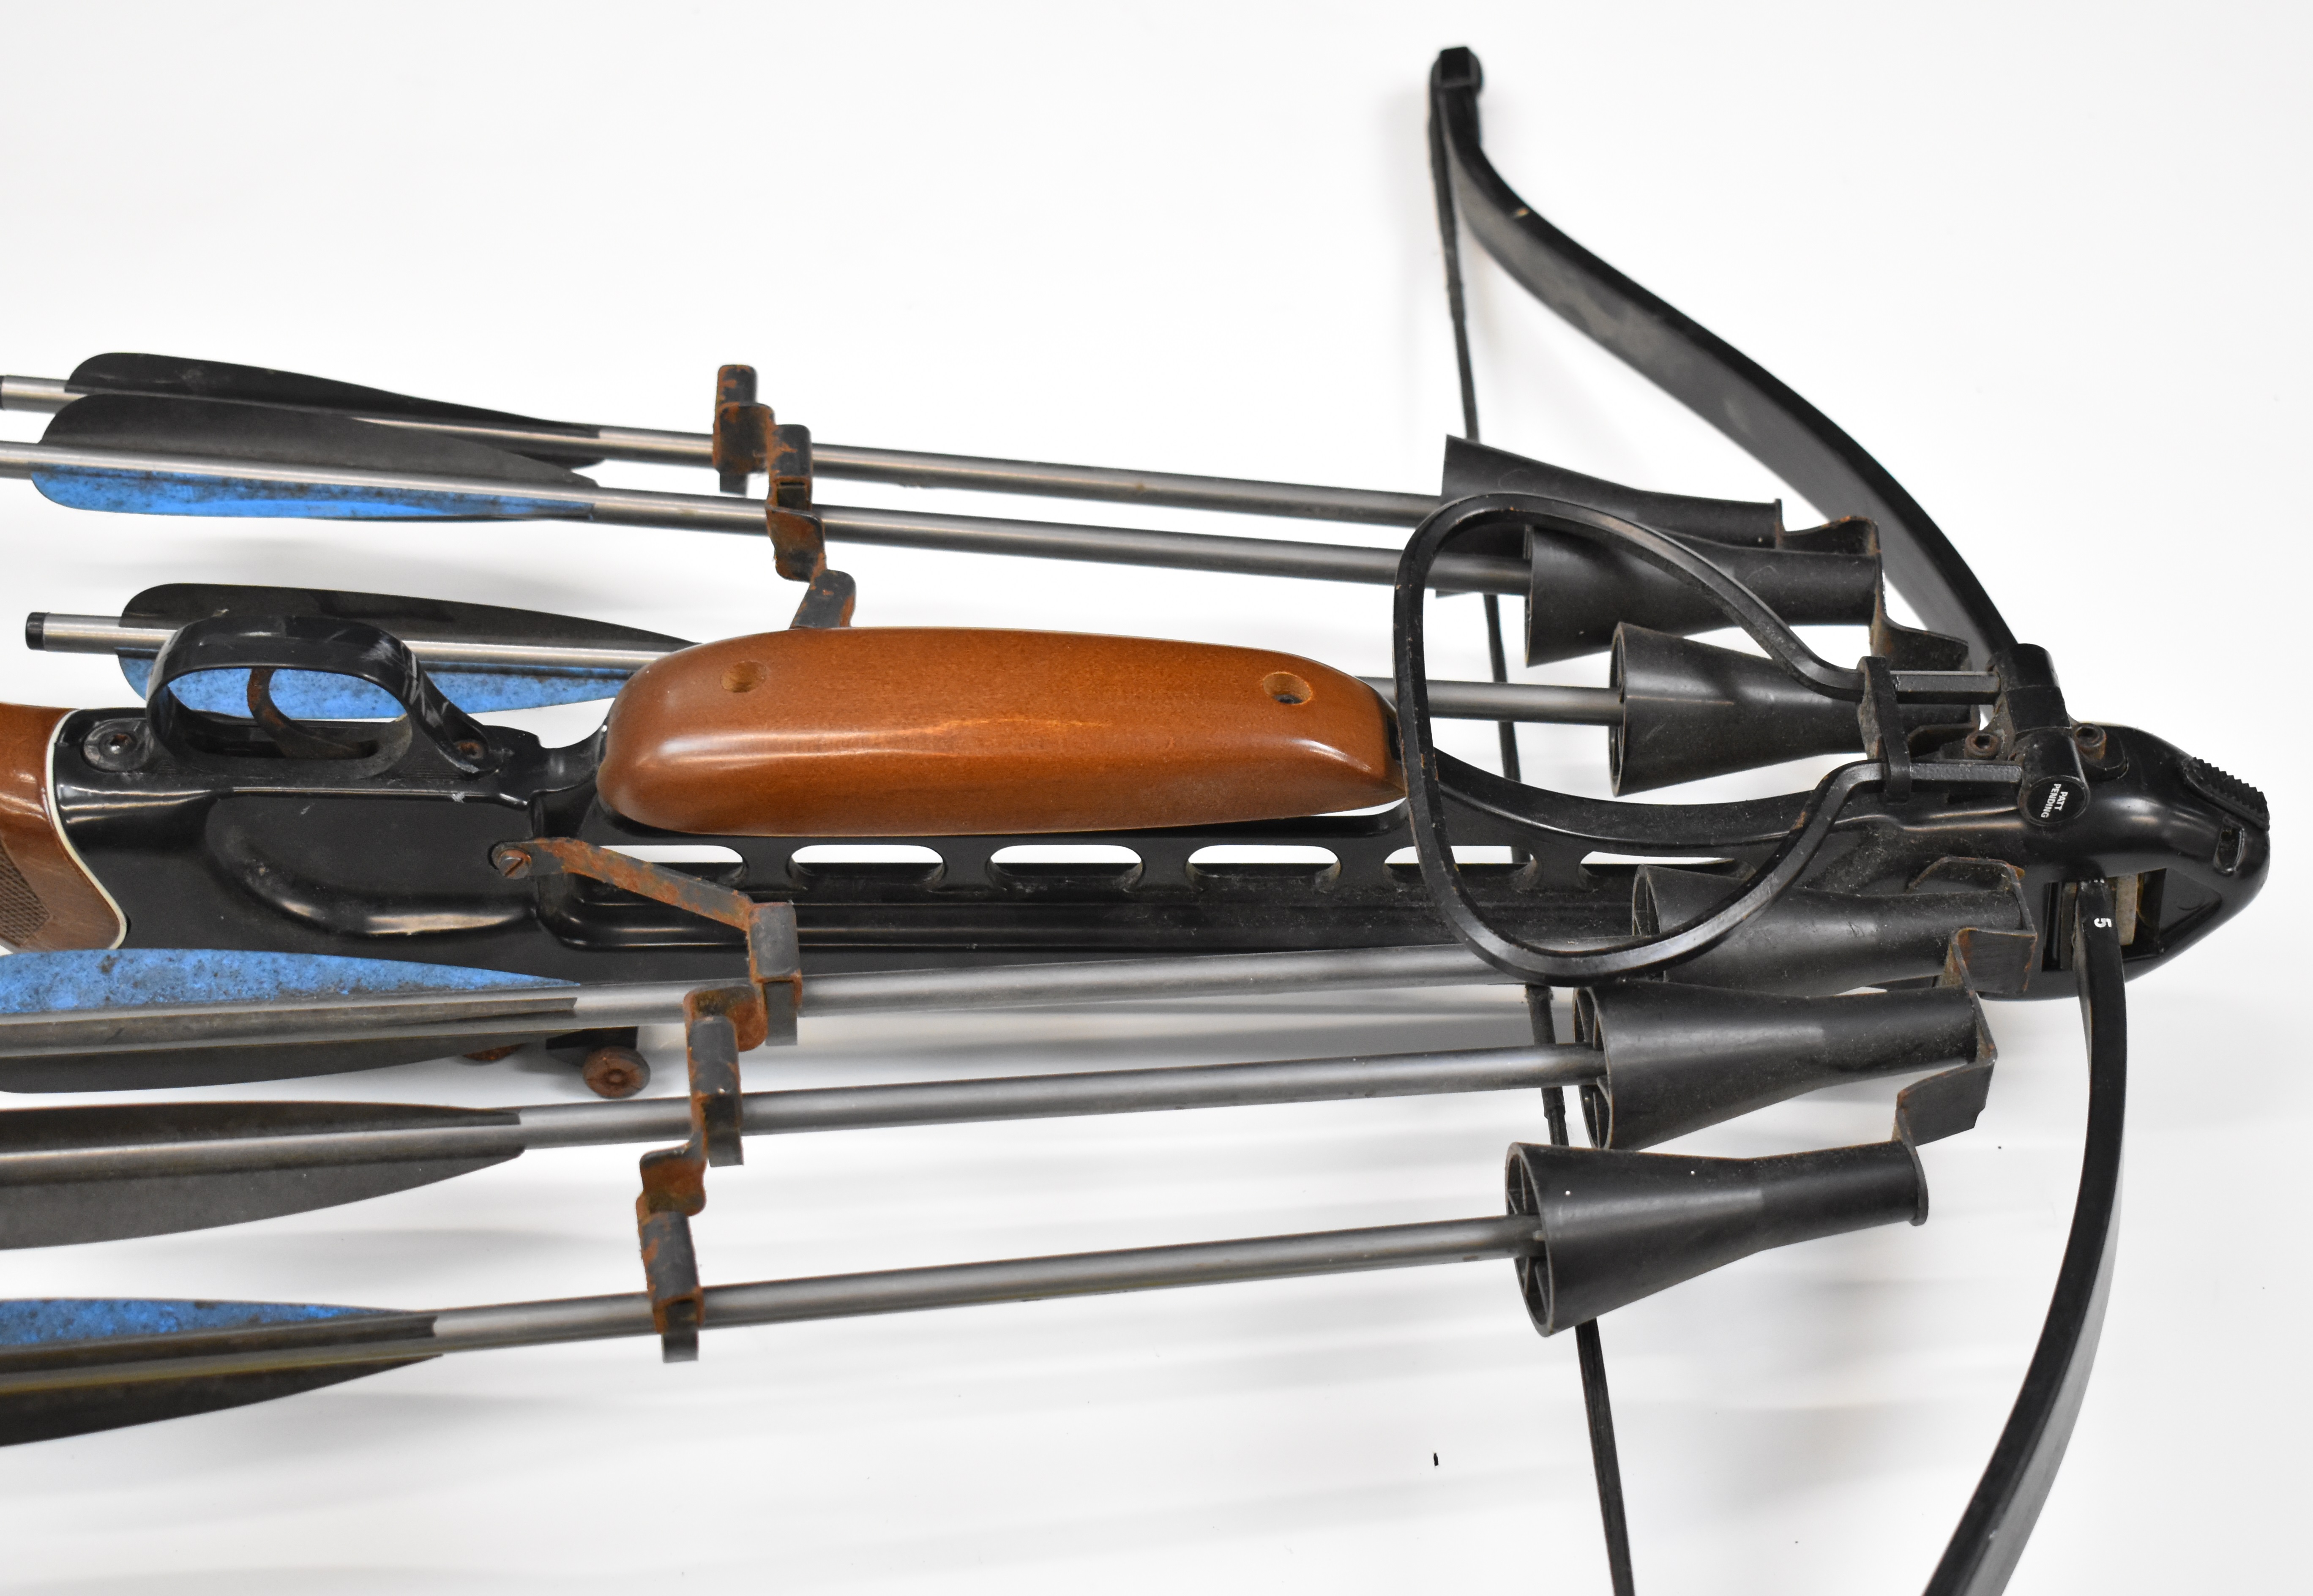 Barnett crossbow with chequered semi-pistol grip, adjustable sights and bolt holder, with 18 bolts - Image 3 of 5